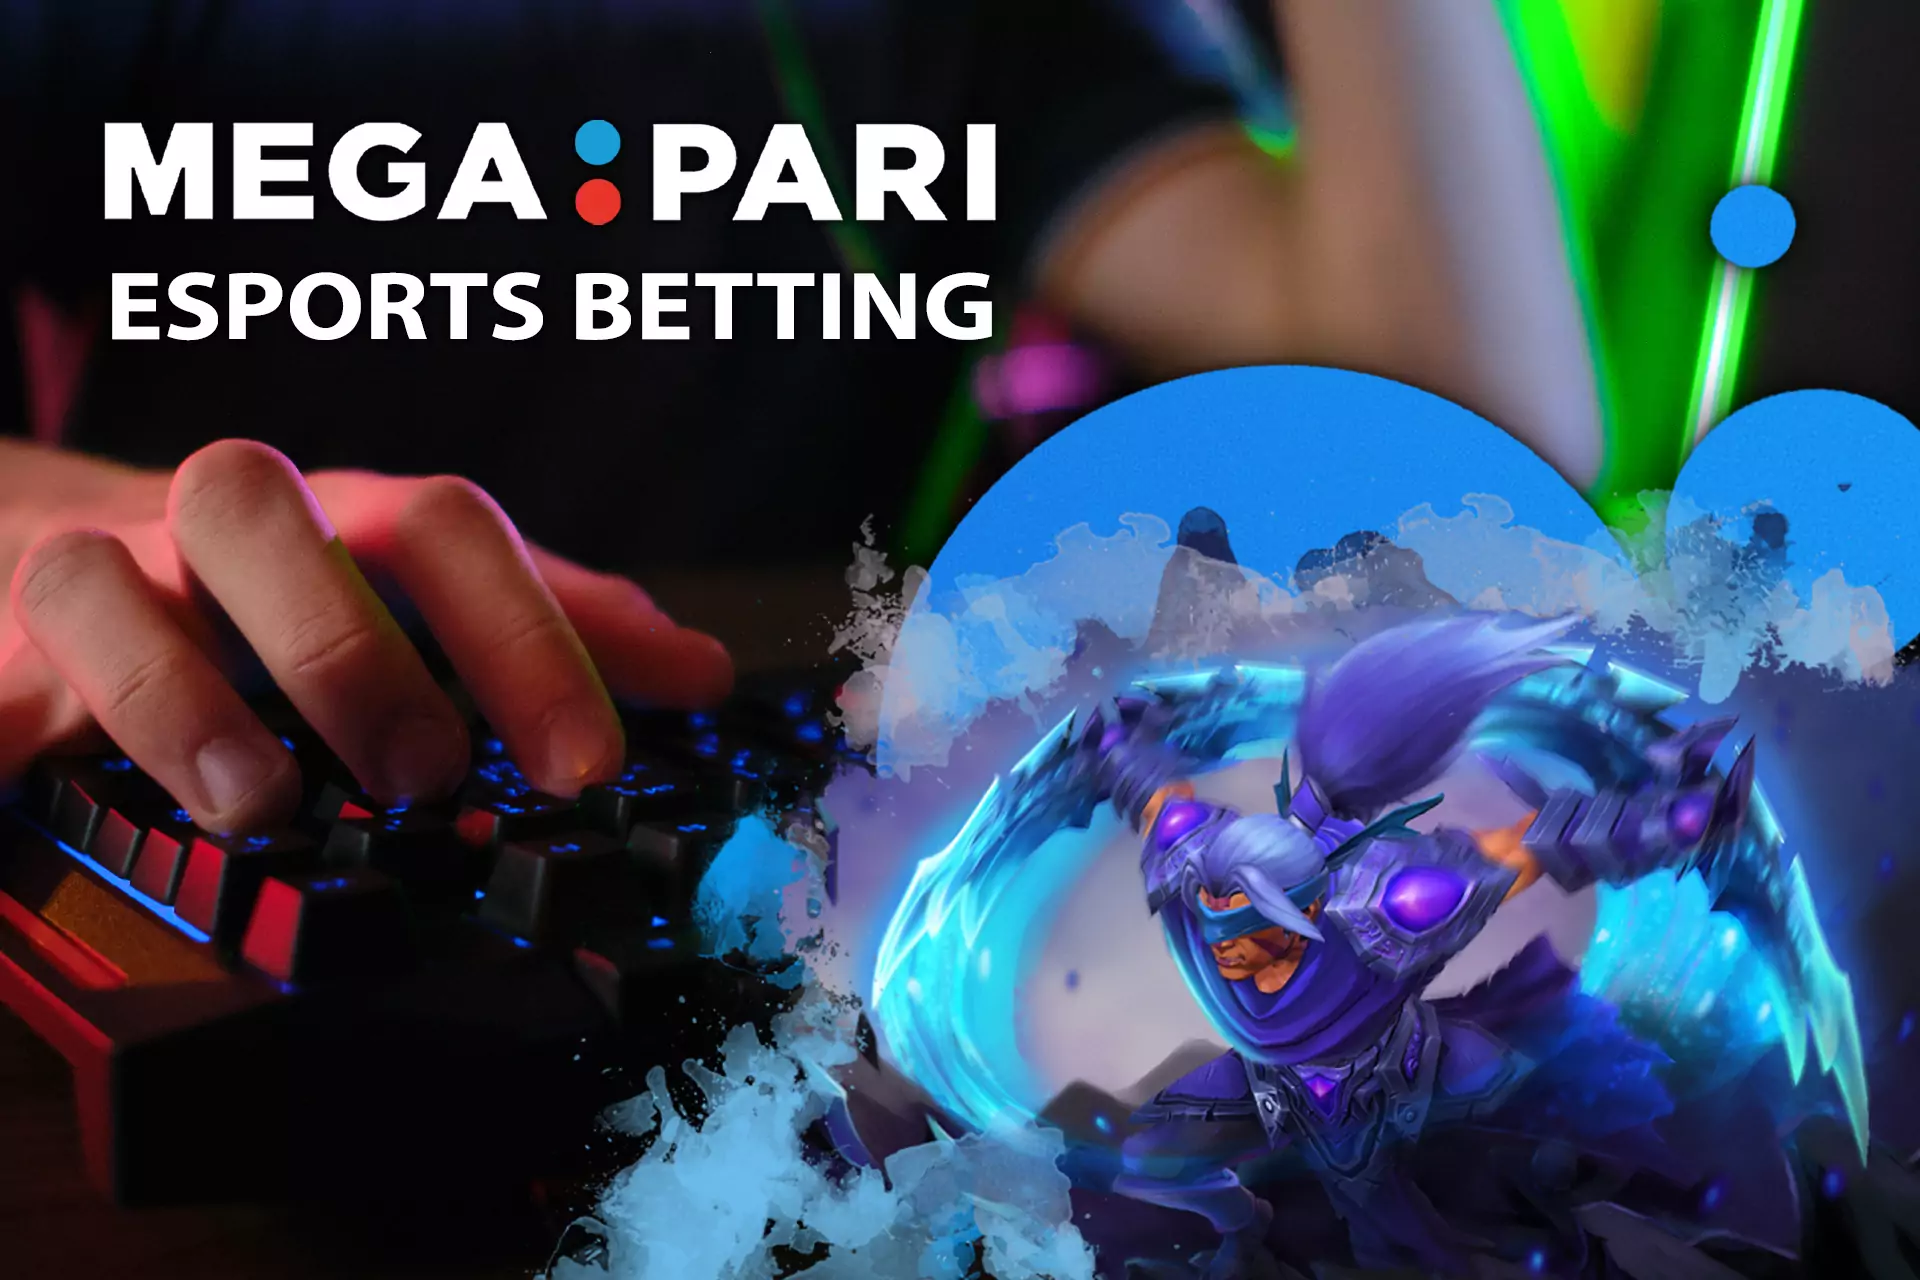 If you like esports matches, try esports betting at the MegaPari.